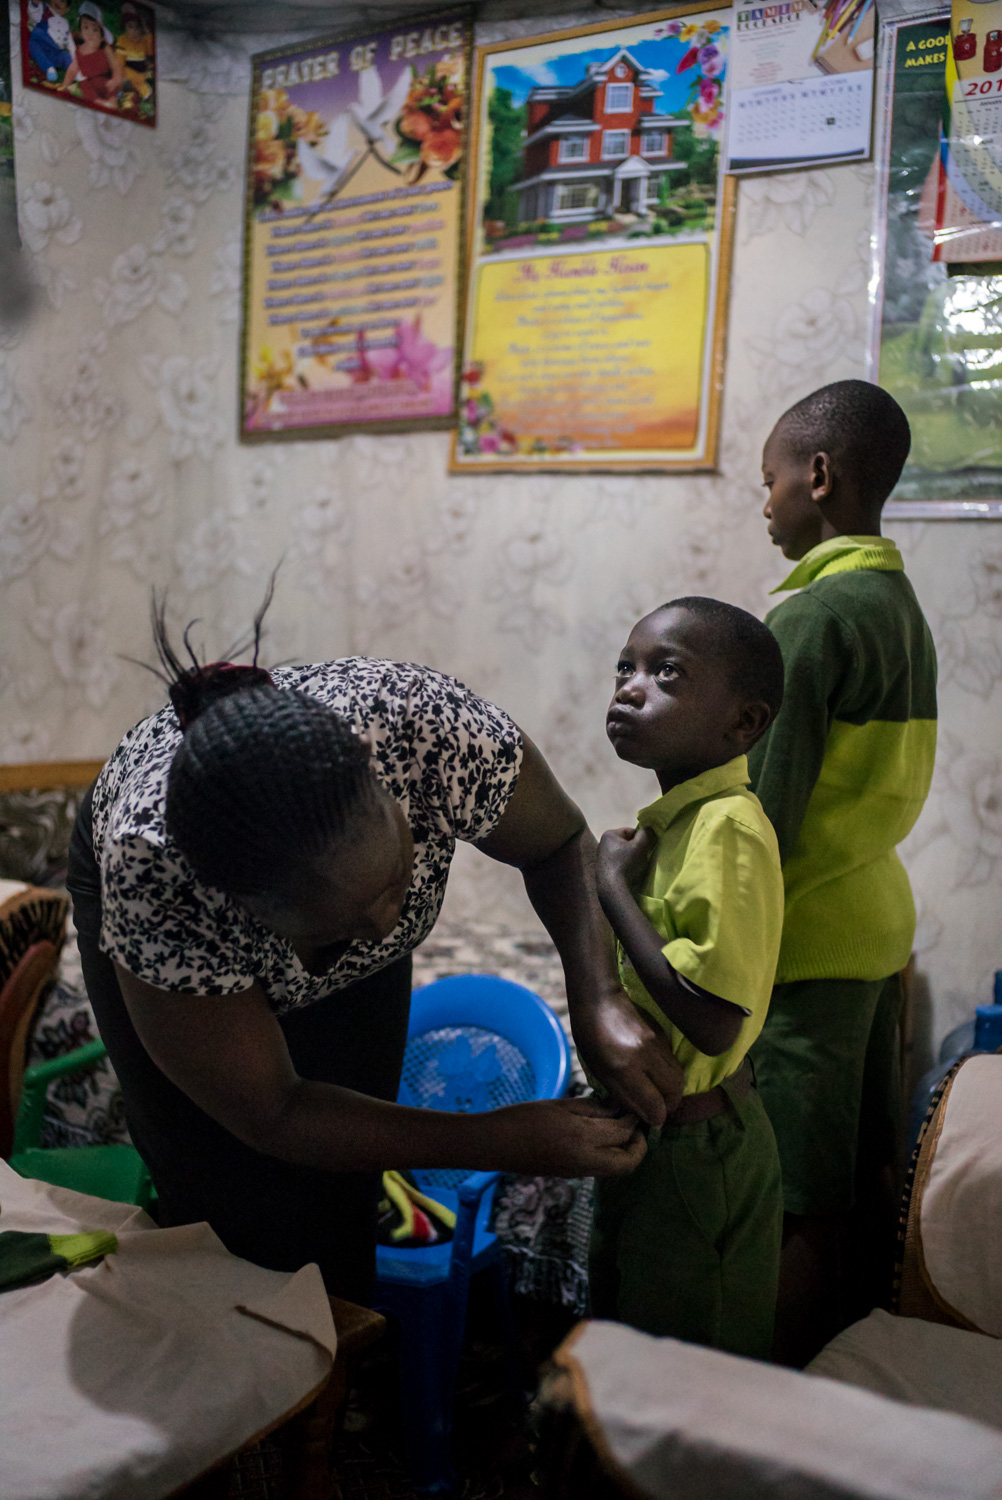  Elizabeth Mumo prepares her sons Samuel, 6, and Joshua, 12, for another schoolday at Bridge. She and her husband save to pay school fees for her two sons to attend Bridge, believing that since the school is run by white westerners, her children are 